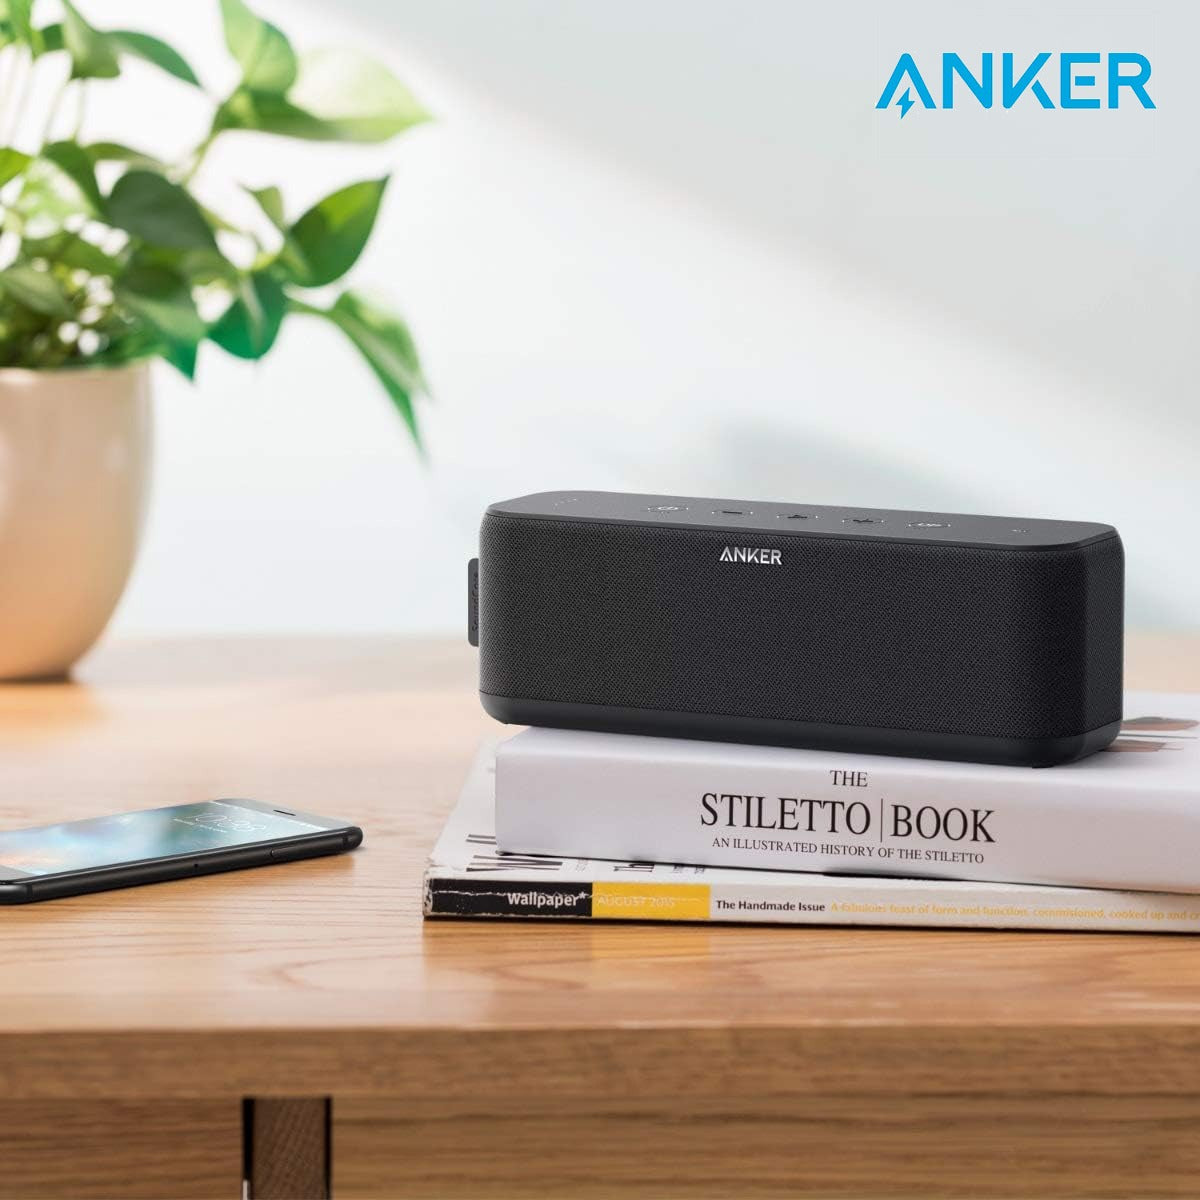 ANKER Soundcore Boost Portable Waterproof Bluetooth Speaker Placed Above Books on the Table.